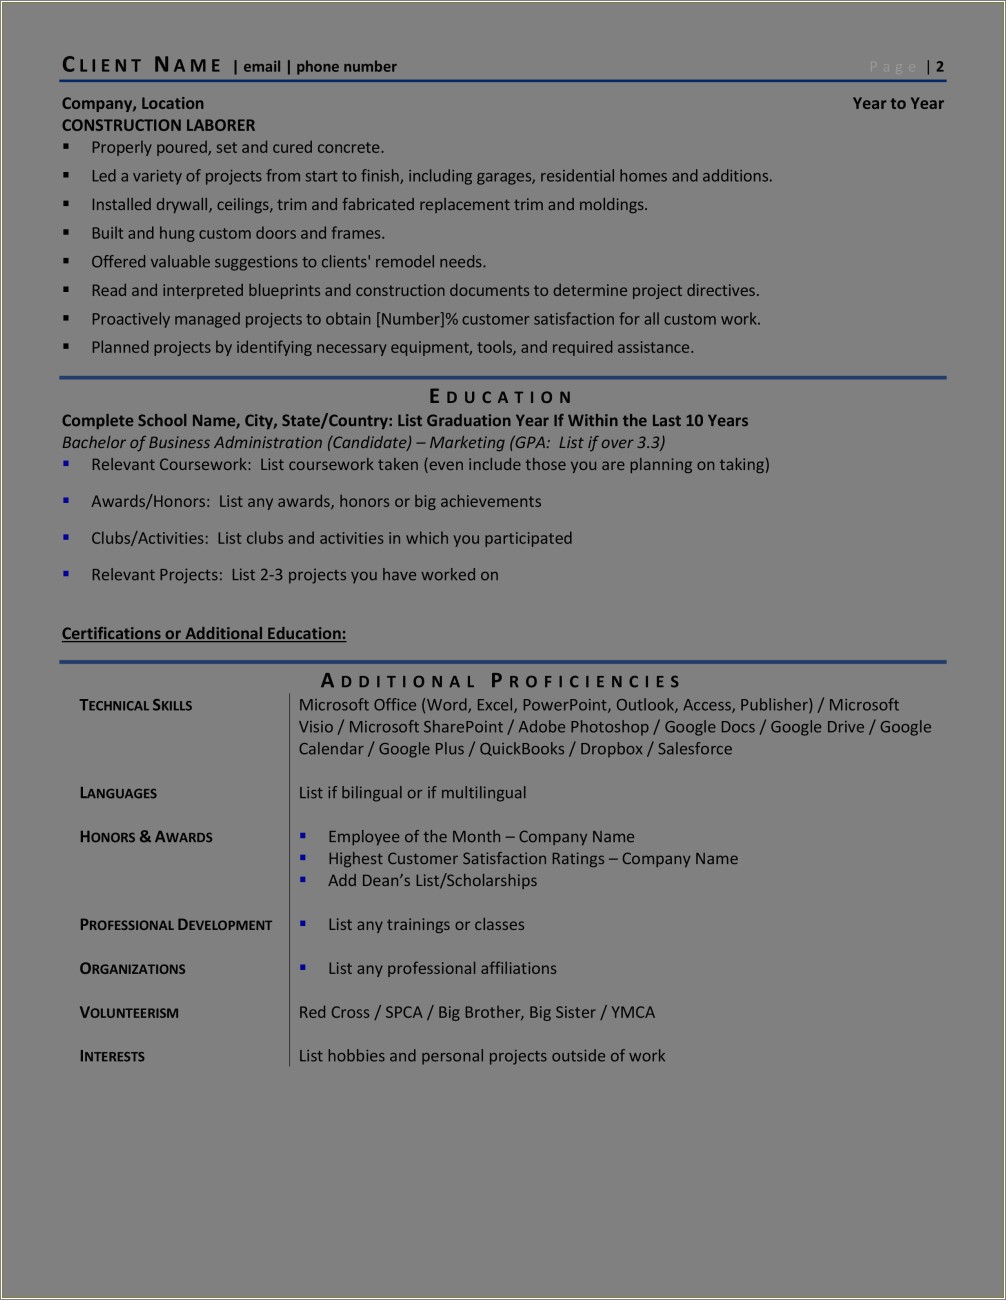 Resume Example For Home Improvement Contractor